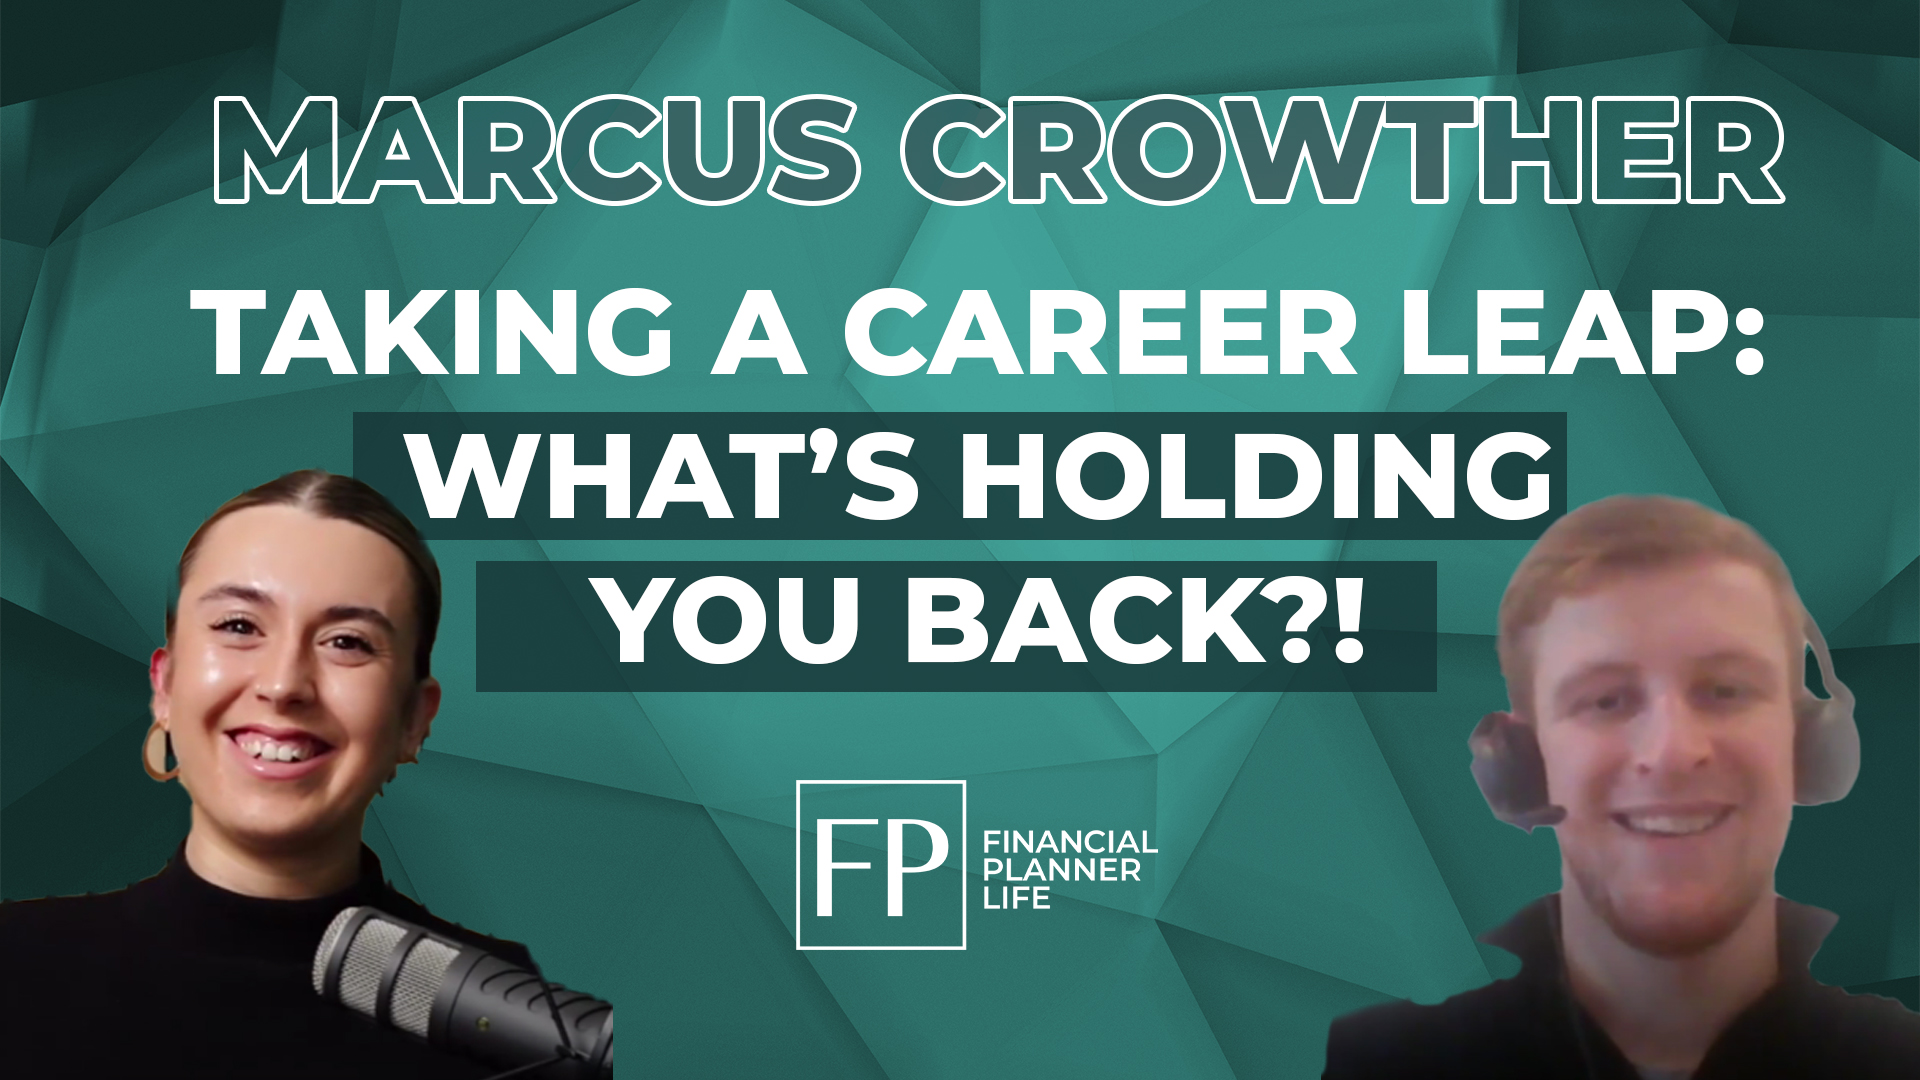 Taking a career leap: What’s holding you back?